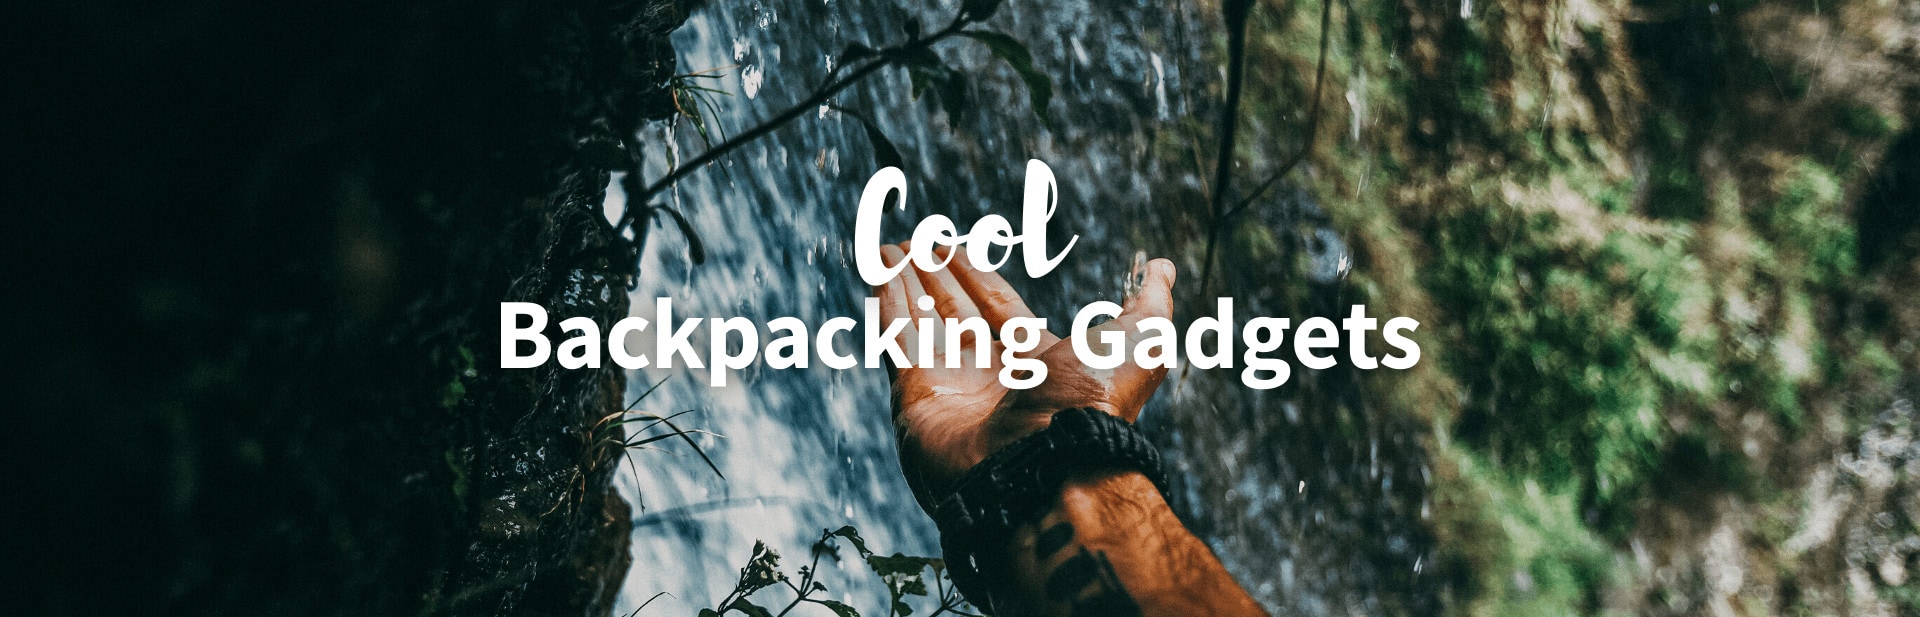 27 Unique and Cool Backpacking Gadgets